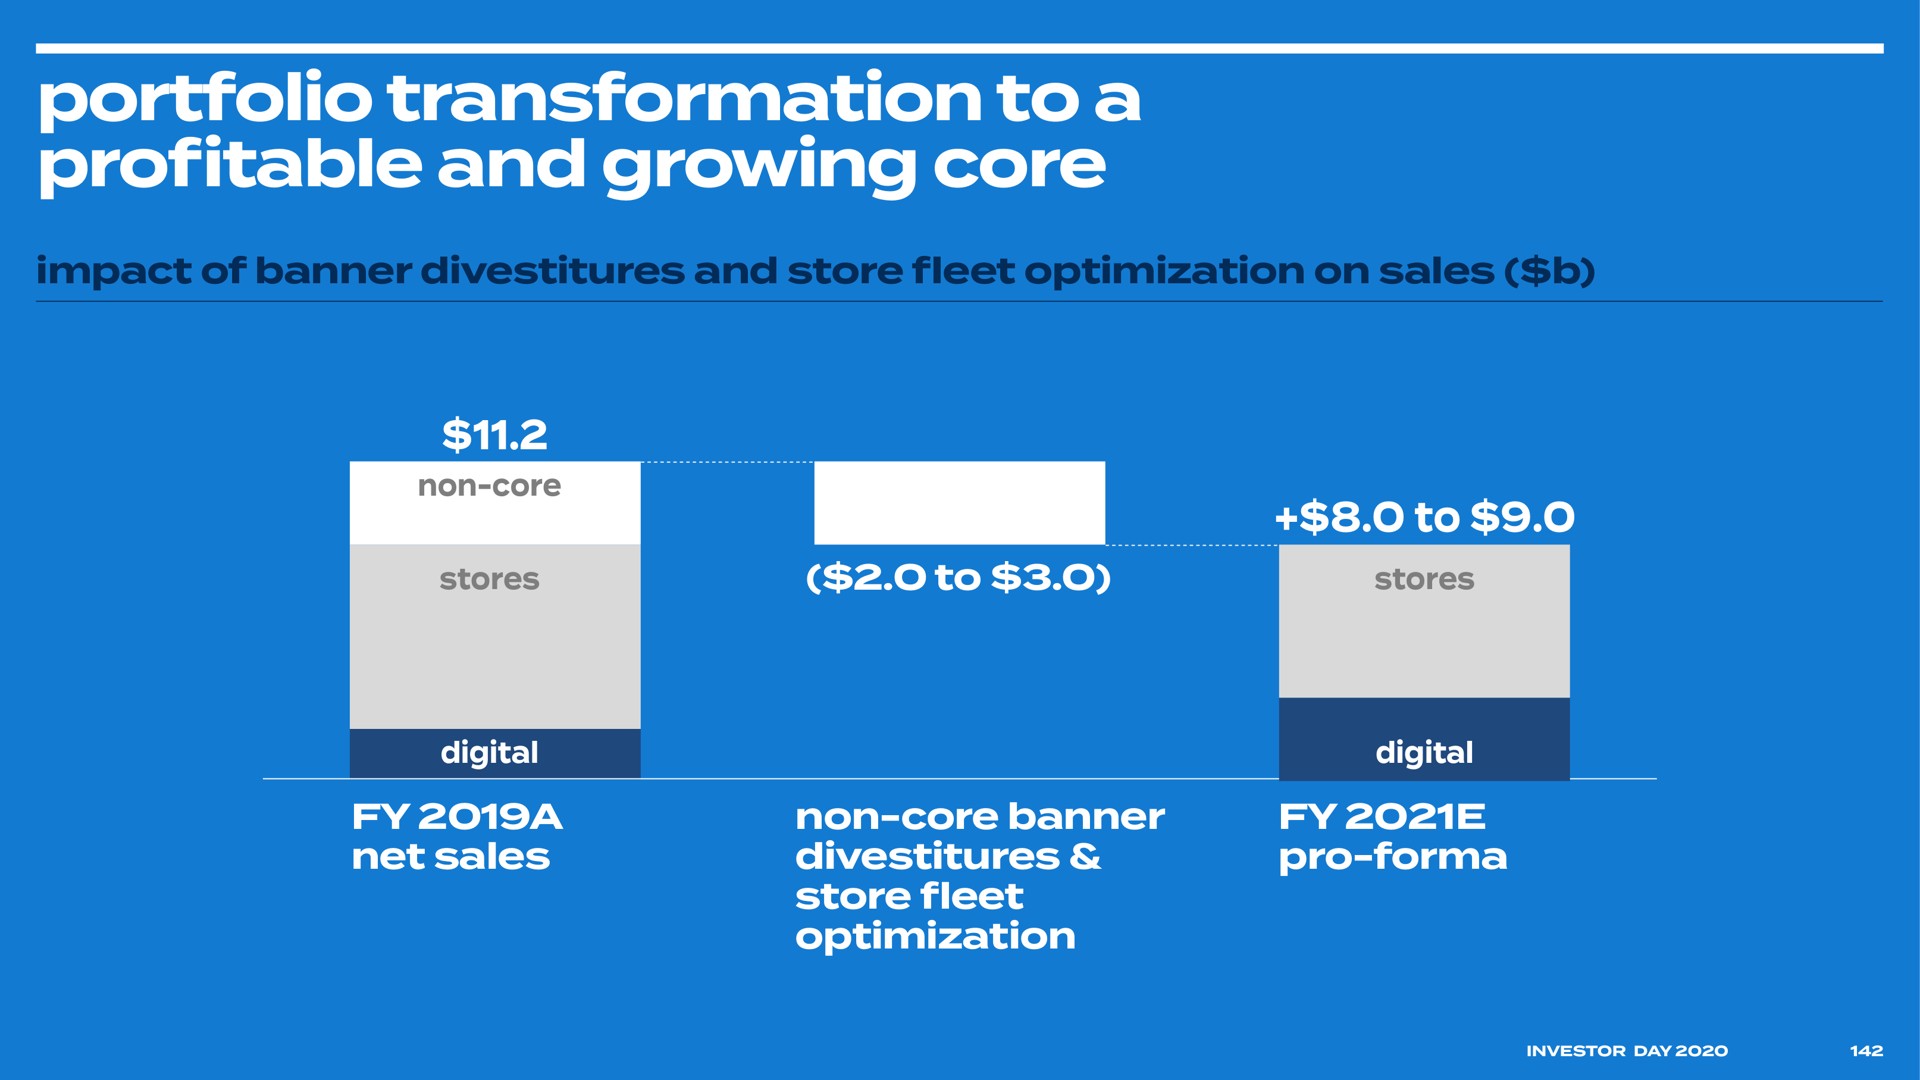 portfolio transformation to a pro table and growing core toa profitable | Bed Bath & Beyond